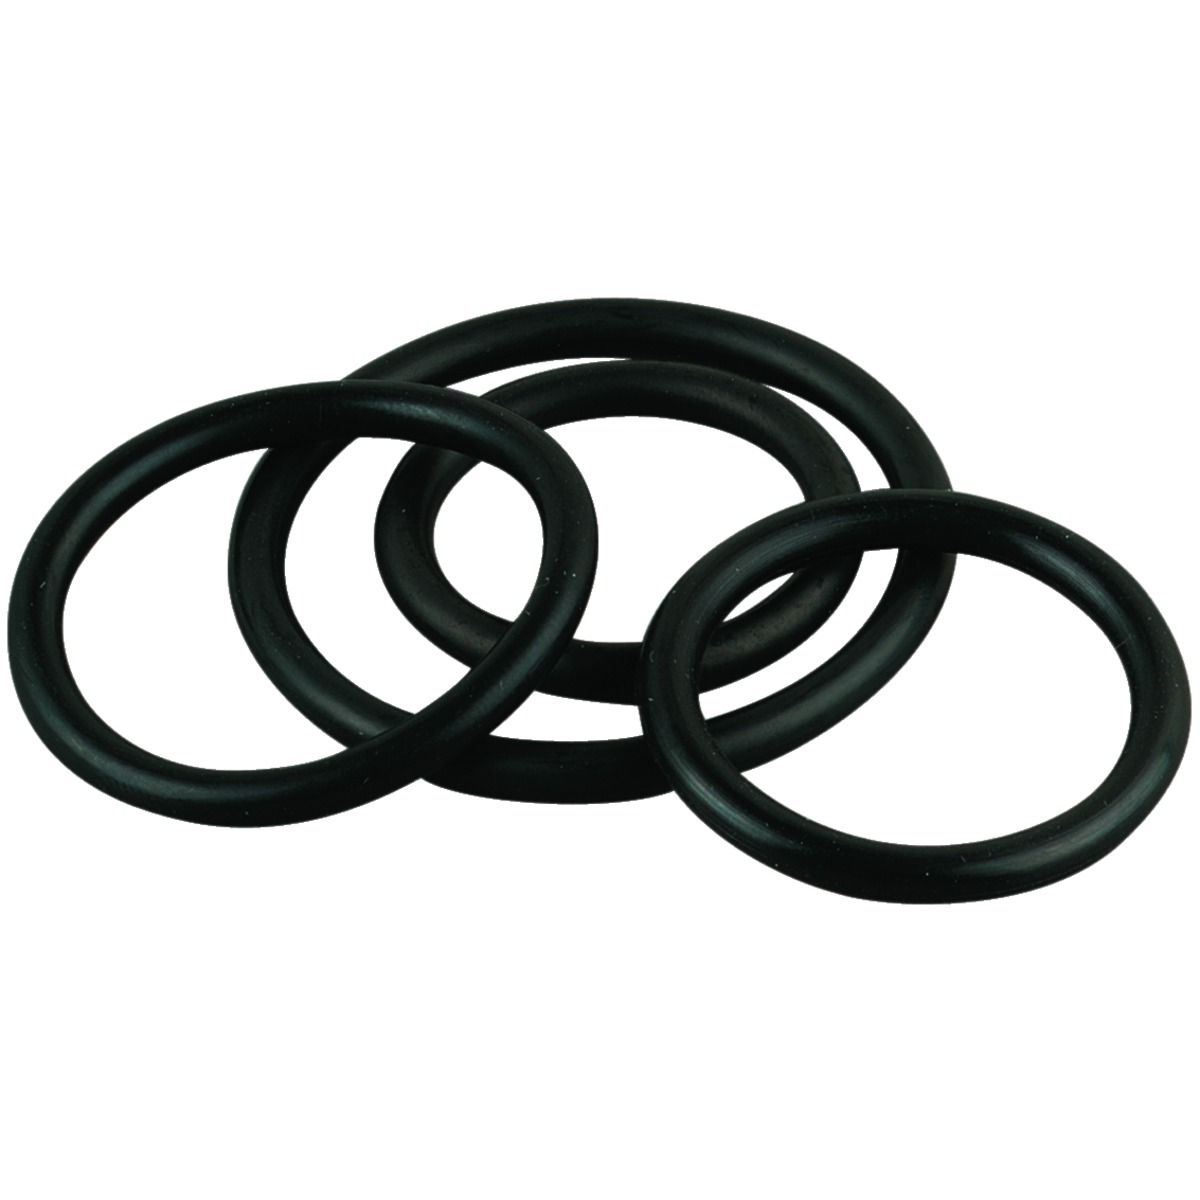 Image of Primaflow Assorted O Rings 3mm Selection Pack